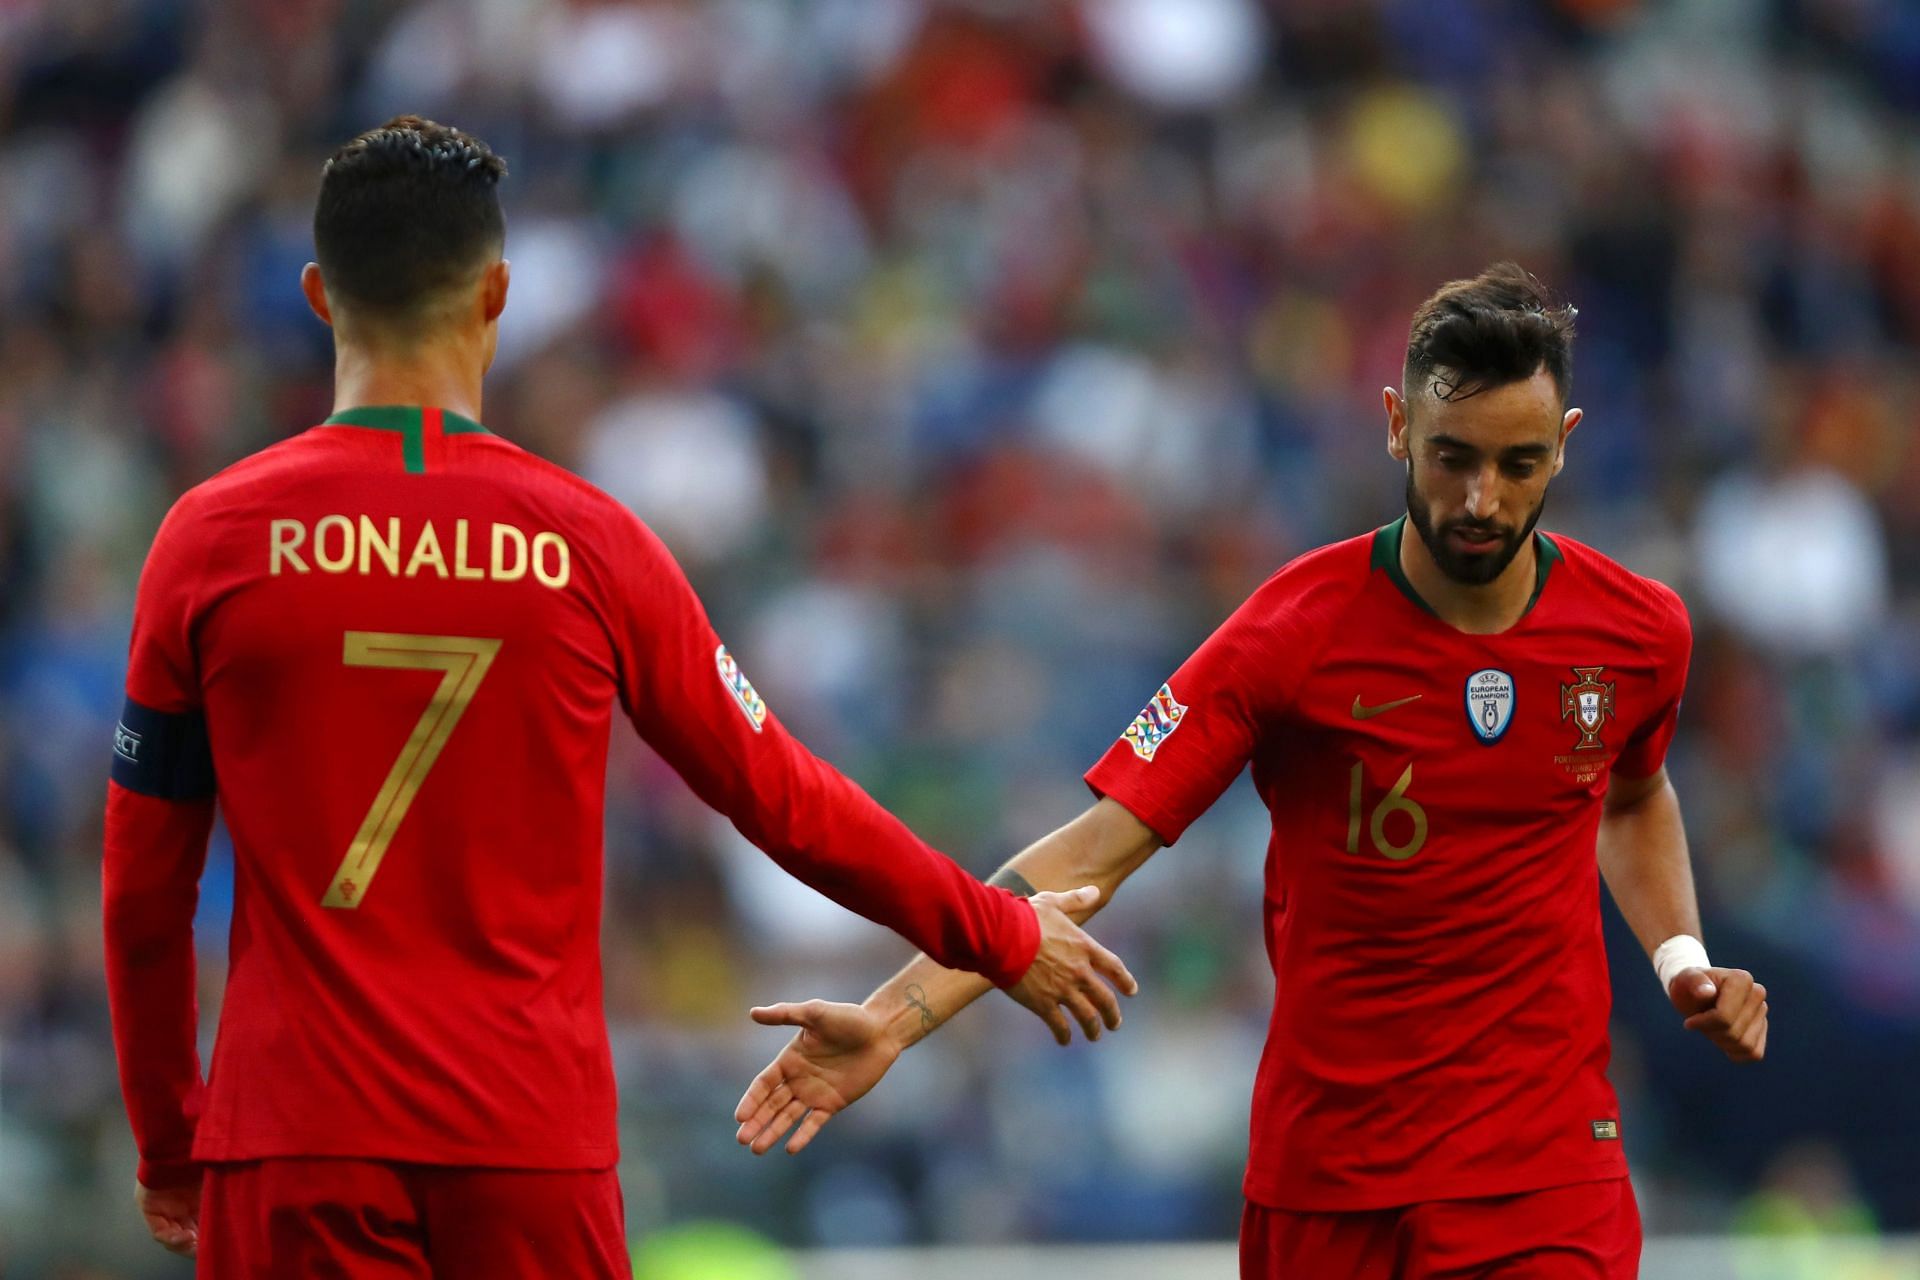 Cristiano Ronaldo and Bruno Fernandes are both expected to start for Portugal tomorrow.